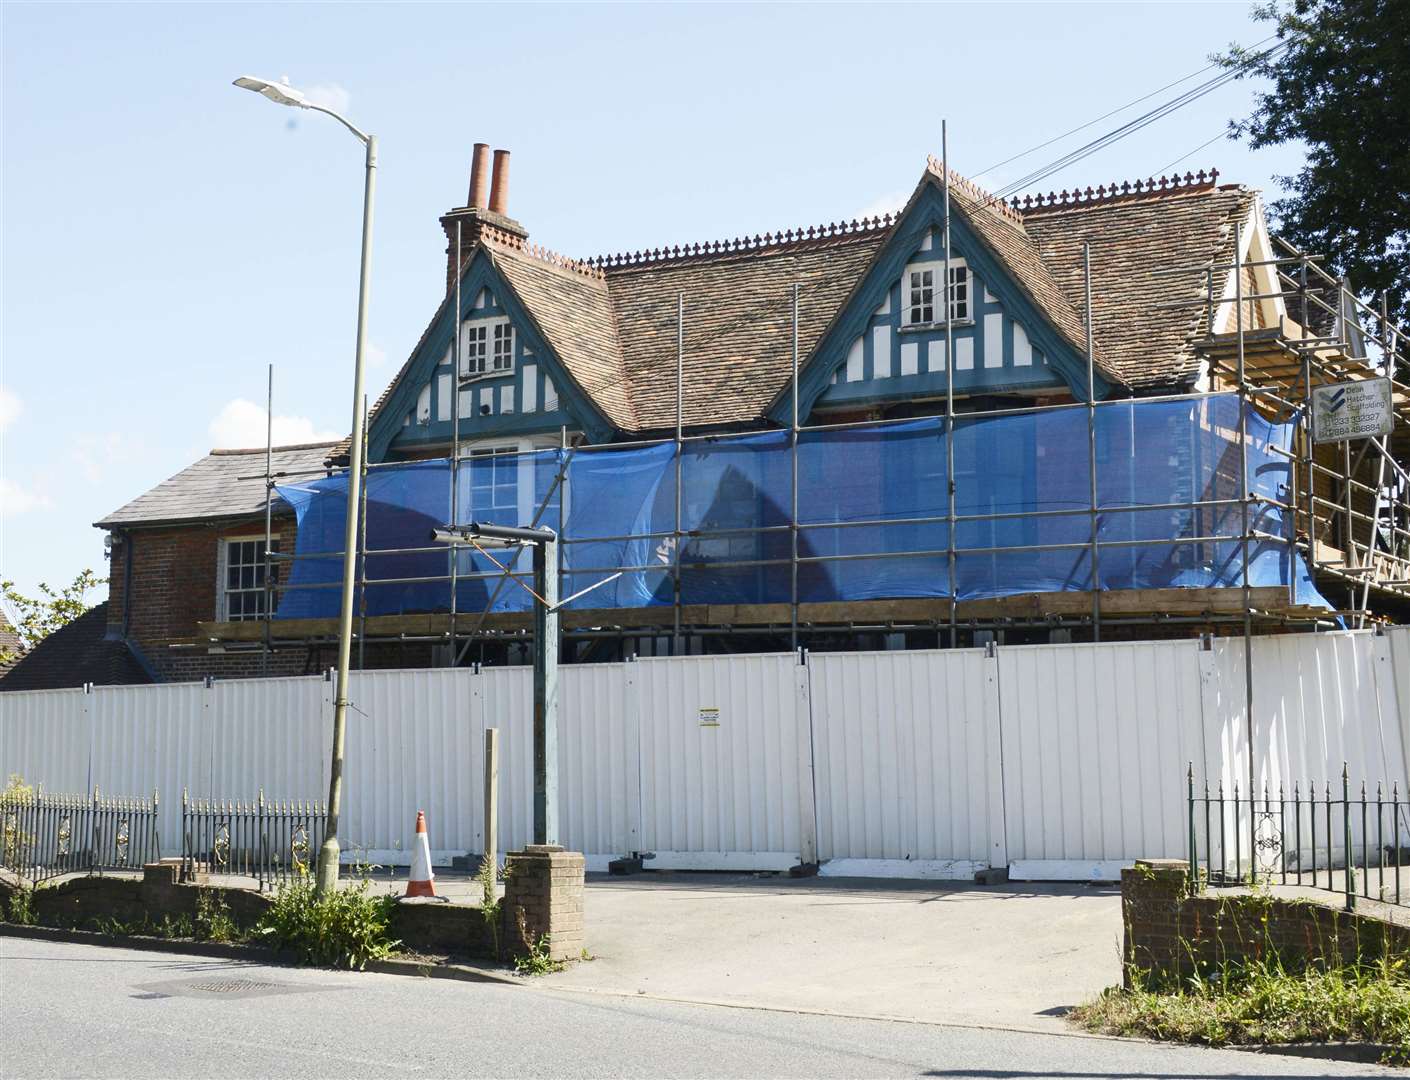 The Croft Hotel in Canterbury Road, Kennington, is being worked on